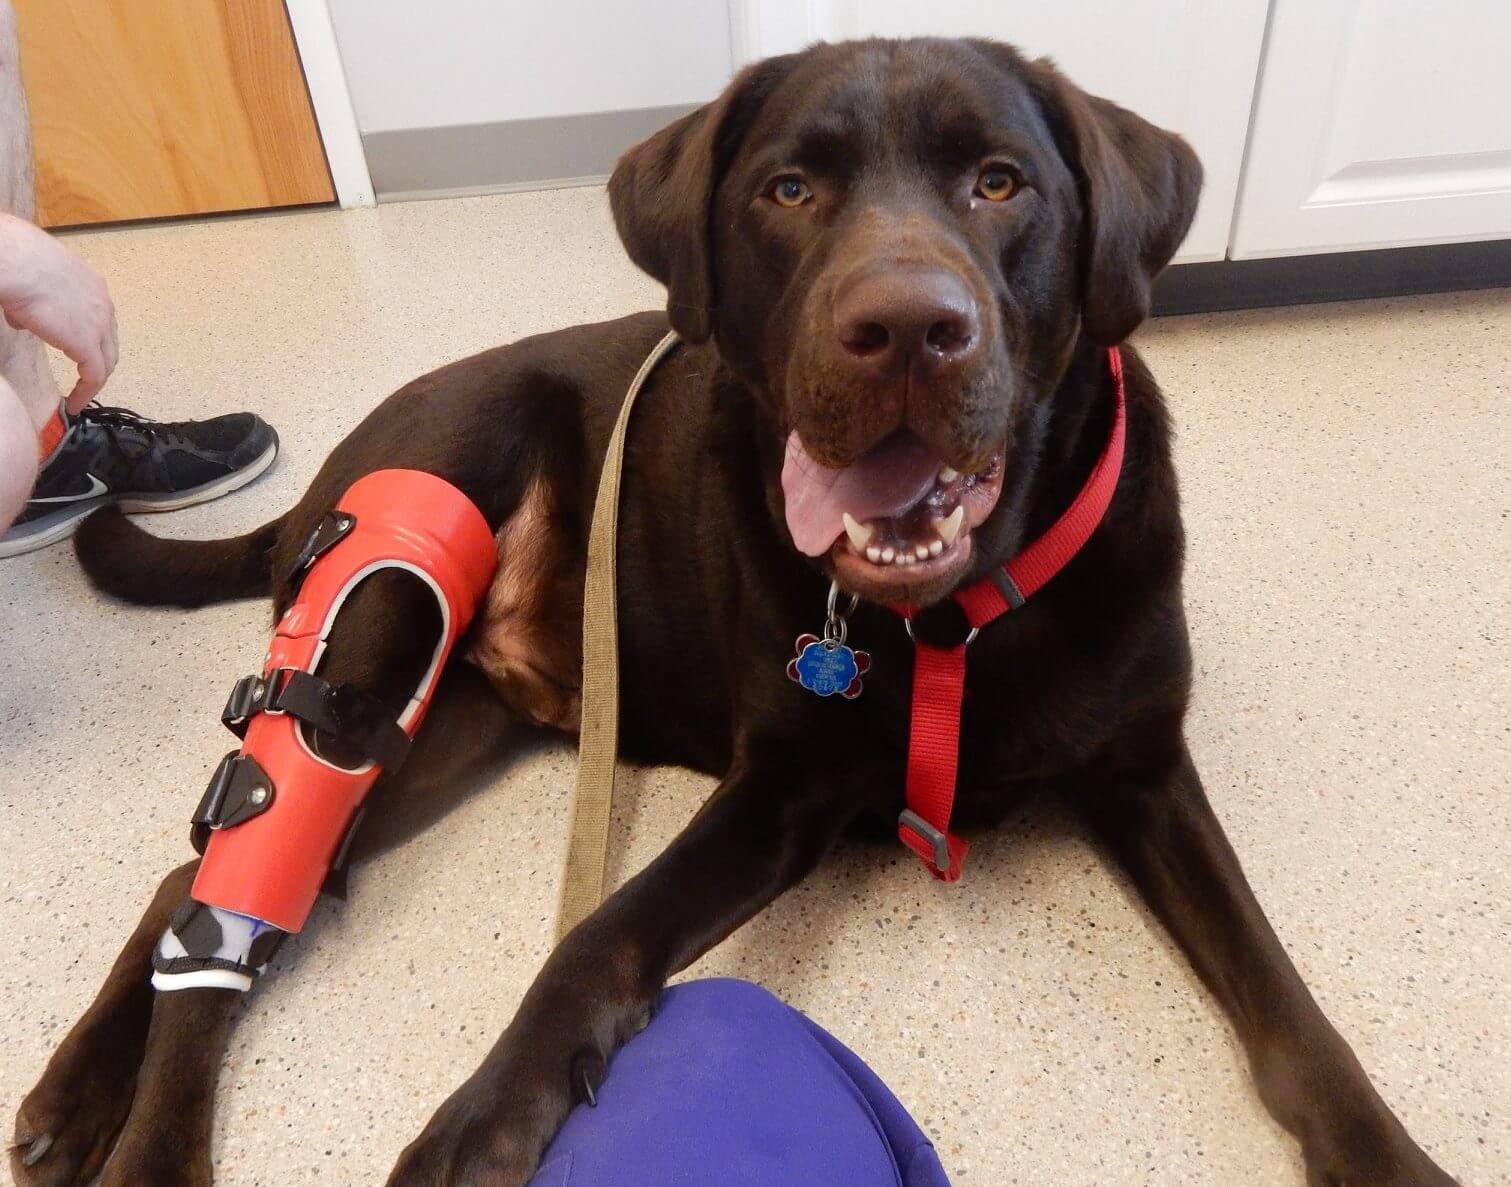 A brown dog with a red brace on its back leg